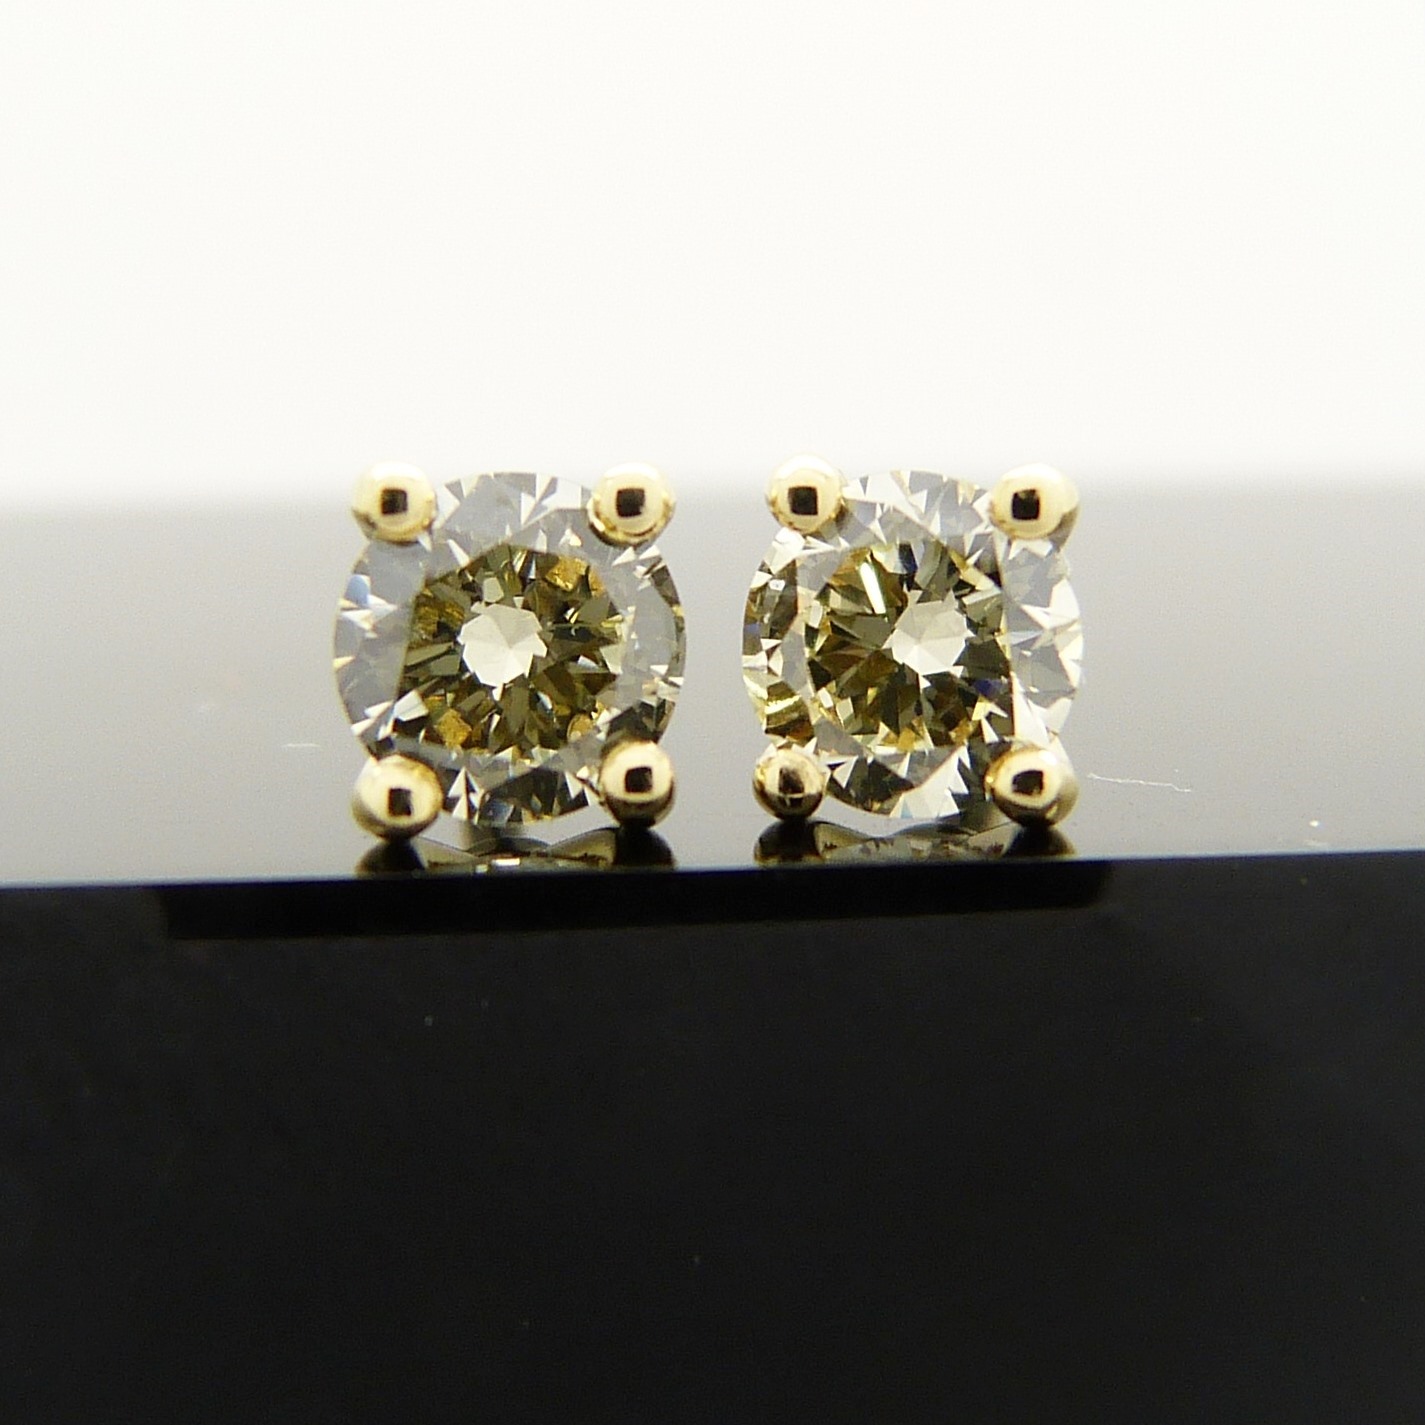 0.51 carat diamond ear studs in 18ct yellow gold, boxed - Image 2 of 6